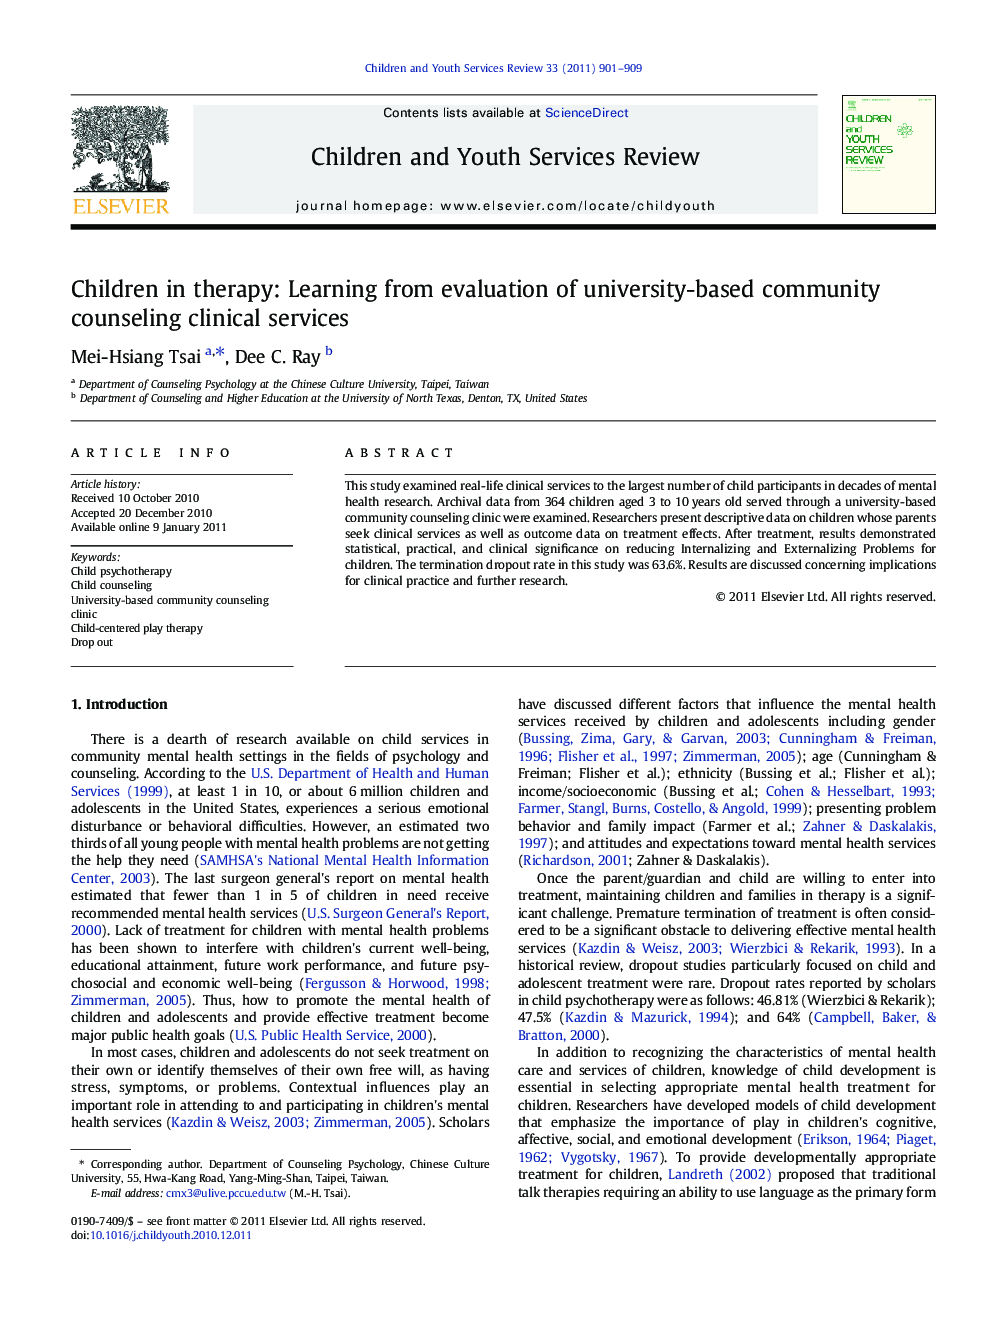 Children in therapy: Learning from evaluation of university-based community counseling clinical services